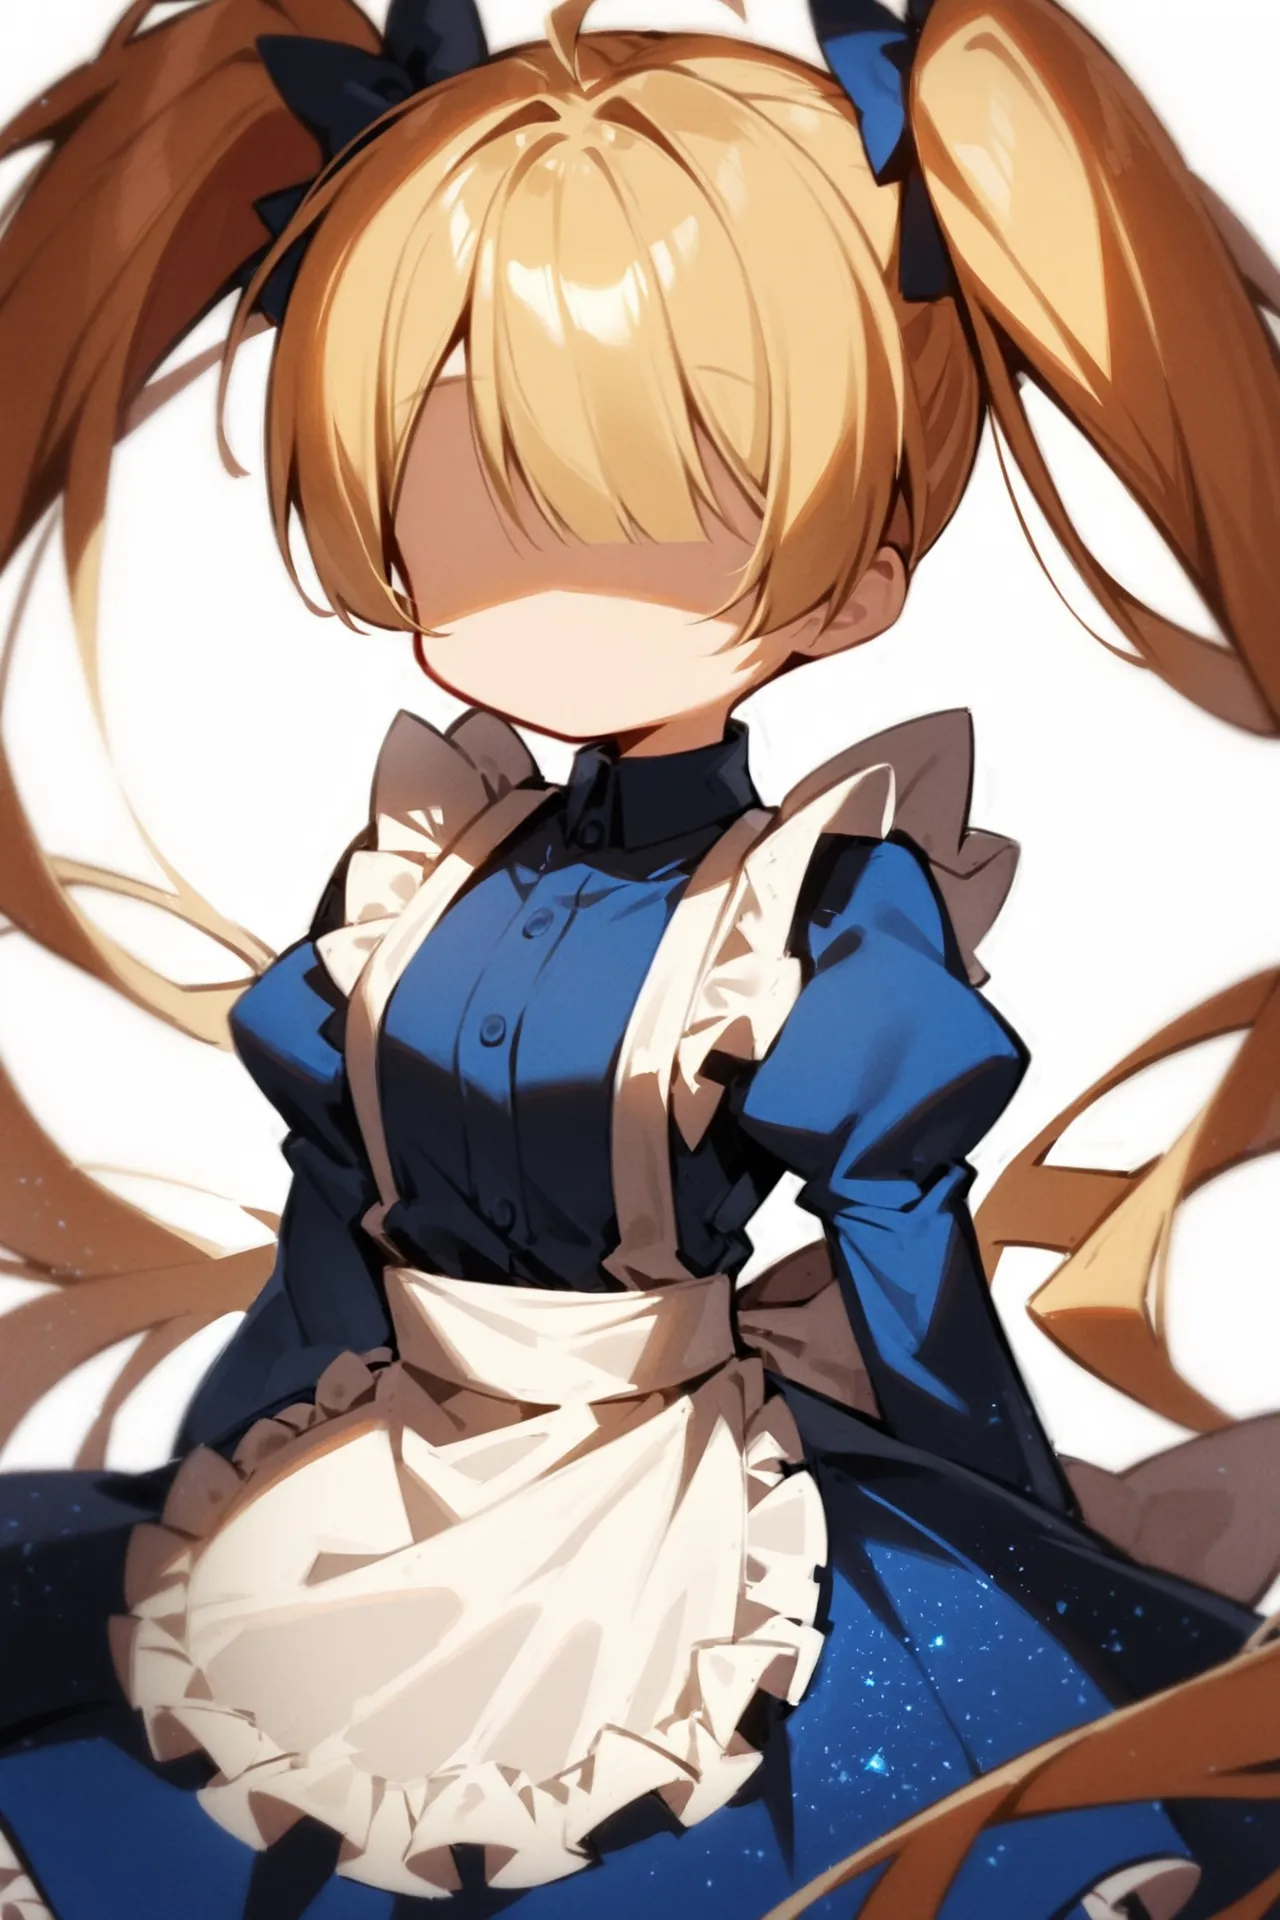 '1girl, no mouth,\nblonde hair, twintails, blue dress, white apron,\nwhite background,\nAlice in glitterworld\nNegative prompt: (worst quality, low quality:1.4), nsfw\nSteps: 35, Sampler: DPM++ 2M SDE Karras, CFG scale: 7, Seed: 1, Size: 640x960, Model hash: 642b08ca49, Model: ConfusionXL2.0_fp16_vae, VAE hash: 63aeecb90f, VAE: sdxl_vae_0.9.safetensors, Denoising strength: 0.6, Clip skip: 2, Hires upscale: 2, Hires steps: 15, Hires upscaler: ESRGAN_4x, Eta: 0.68, Version: v1.7.0'